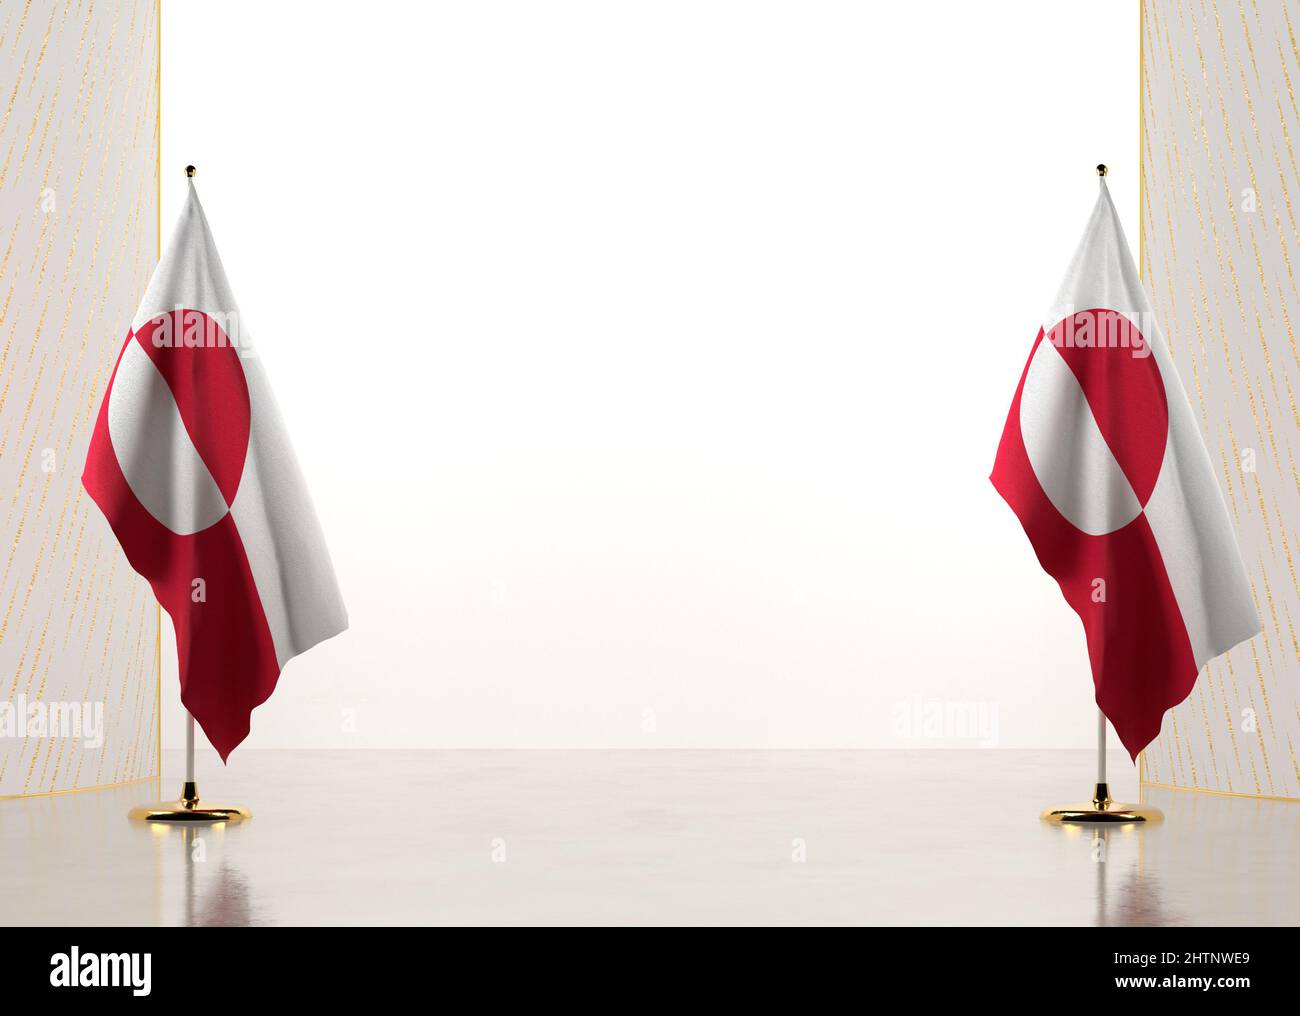 Border made with Greenland national flag. Template elements for your certificate and diploma. Horizontal orientation. 3D illustration. Stock Photo